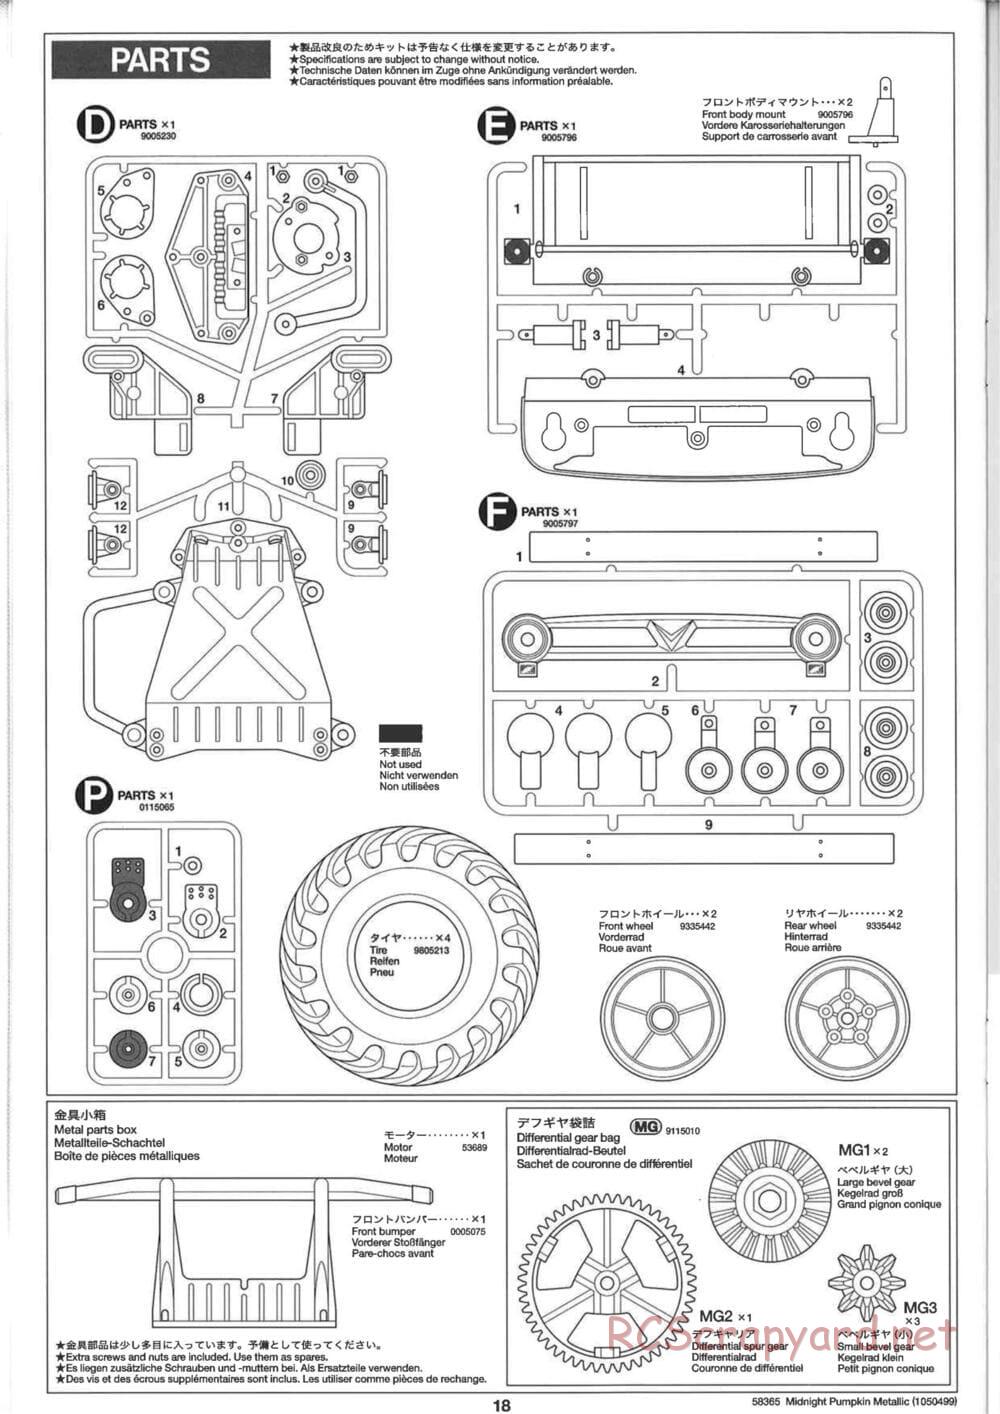 Tamiya - Midnight Pumpkin Chrome Metallic Special - CW-01 Chassis - Manual - Page 18